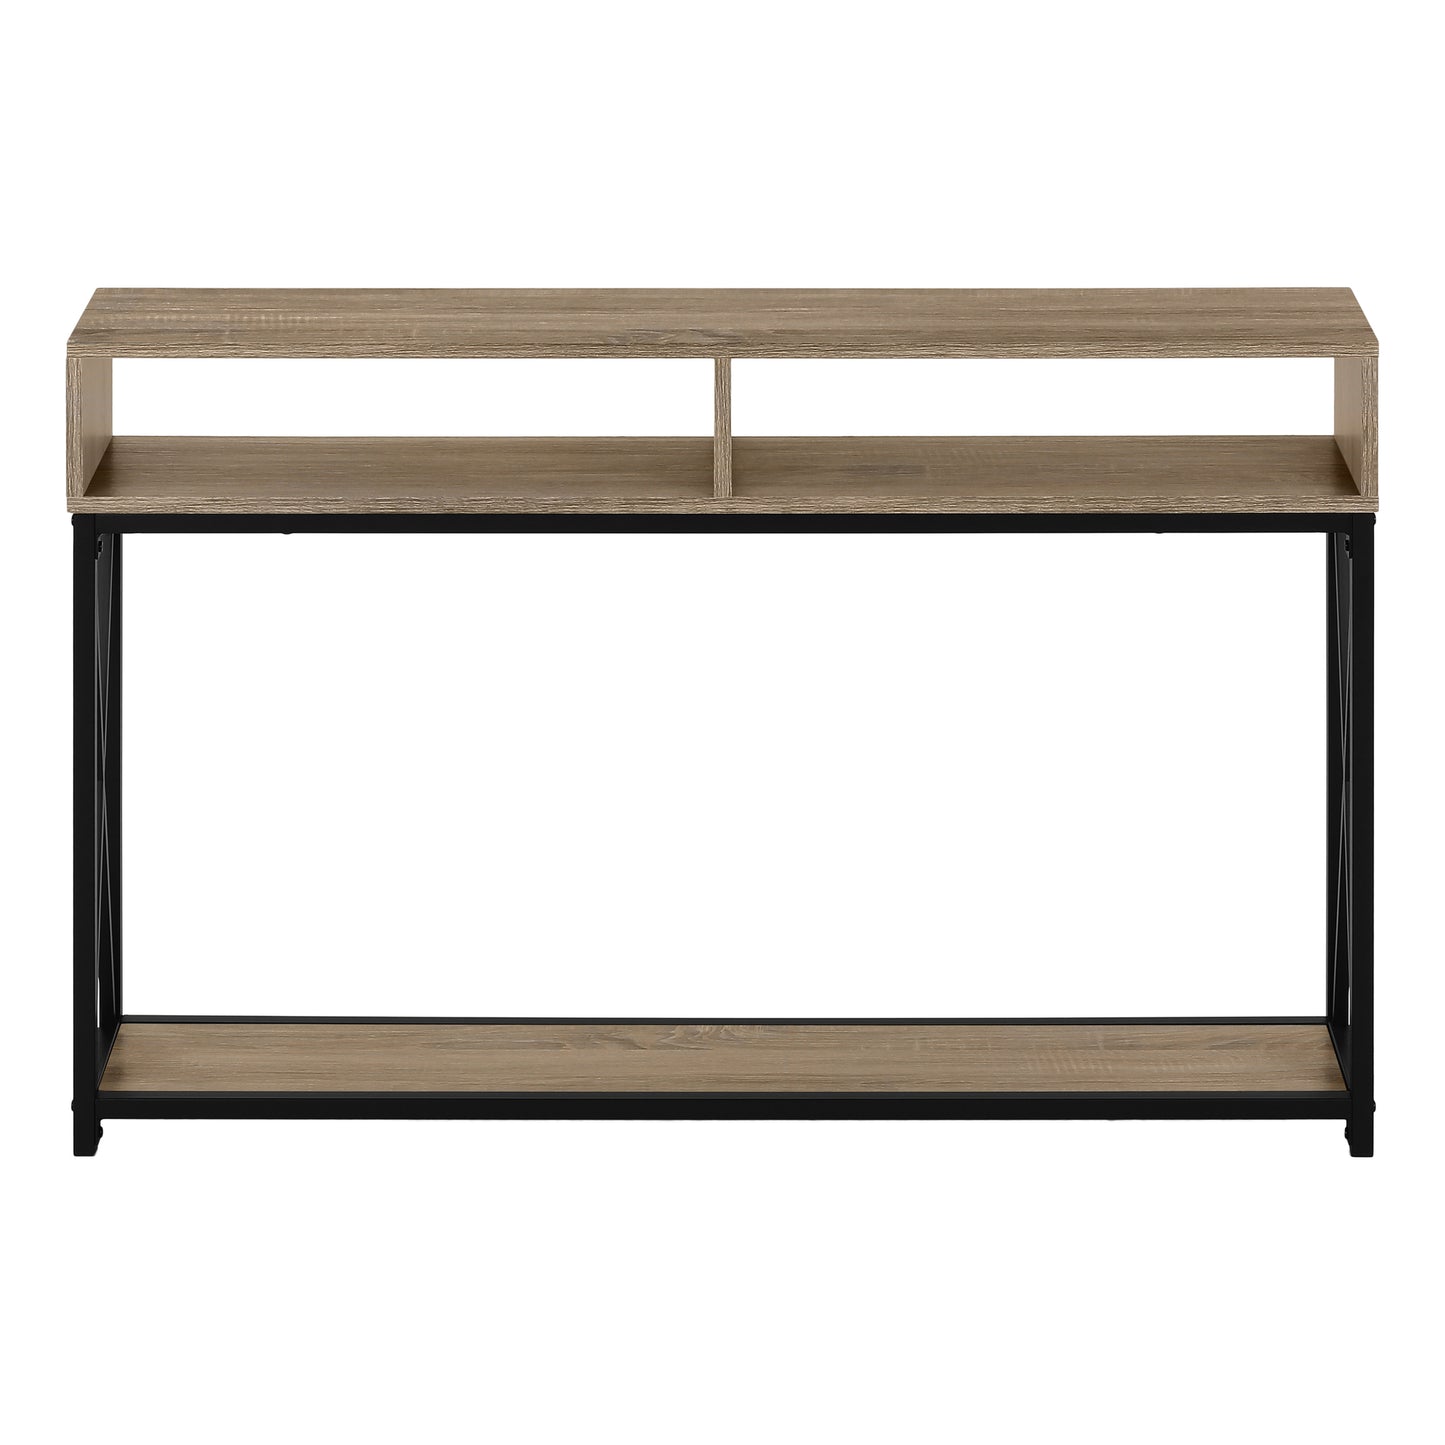 Contemporary 48L Wood Hall Console in Taupe Finish